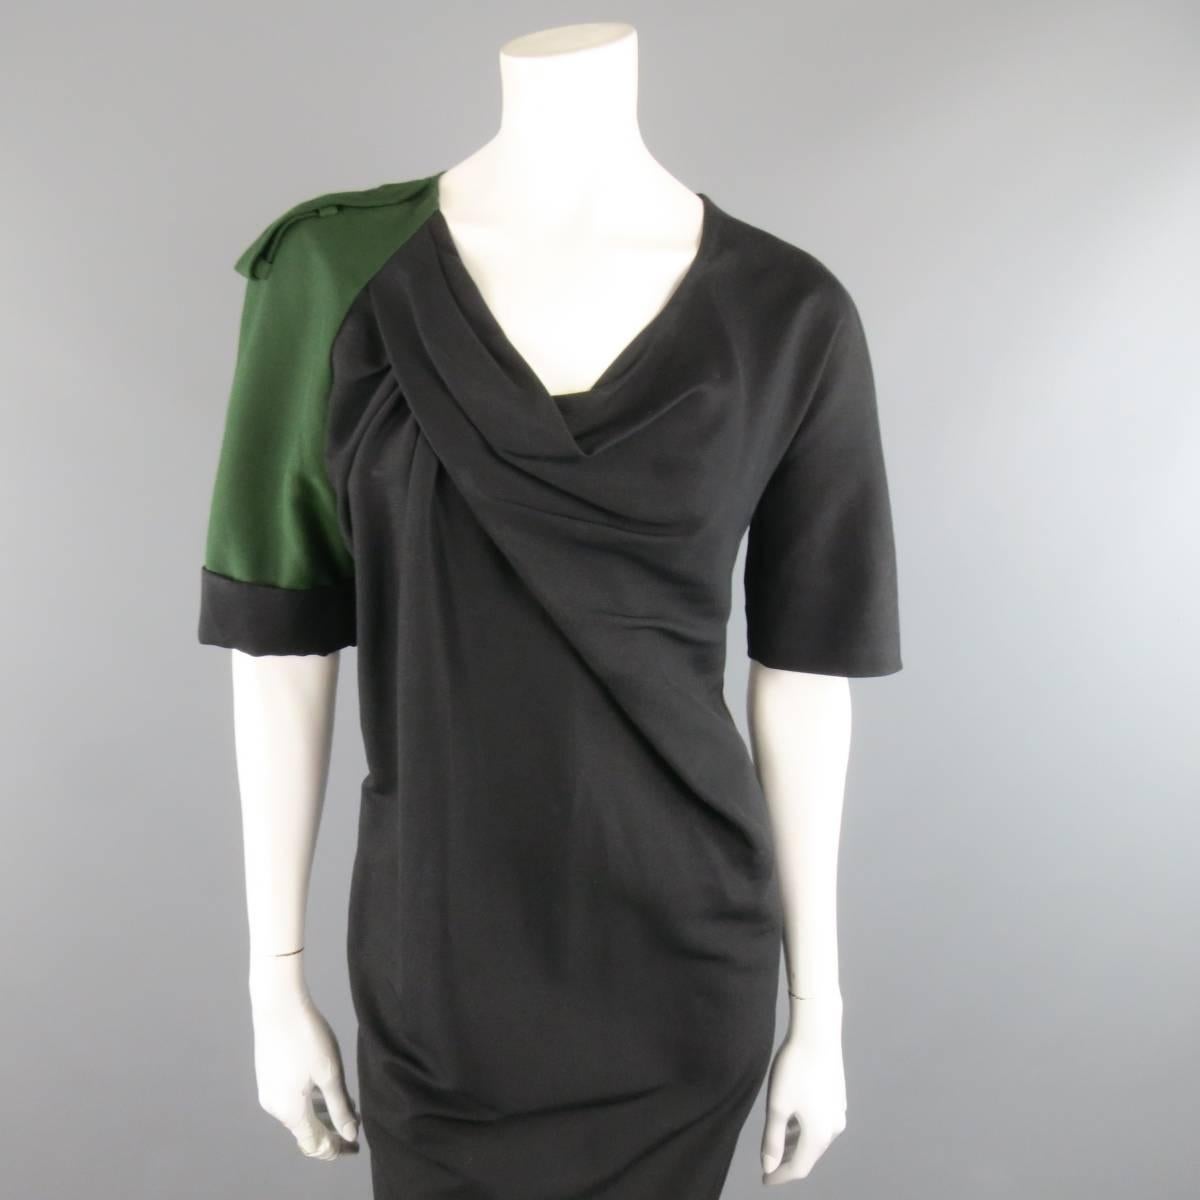 This avante garde DRIES VAN NOTEN dress comes in a black cotton silk blend twill and features an asymmetrical draped scoop neck, shift silhouette, side panel, and green epaulet cuffed military sleeve. Minor wear. Made in Belguim.
 
Good Pre-Owned